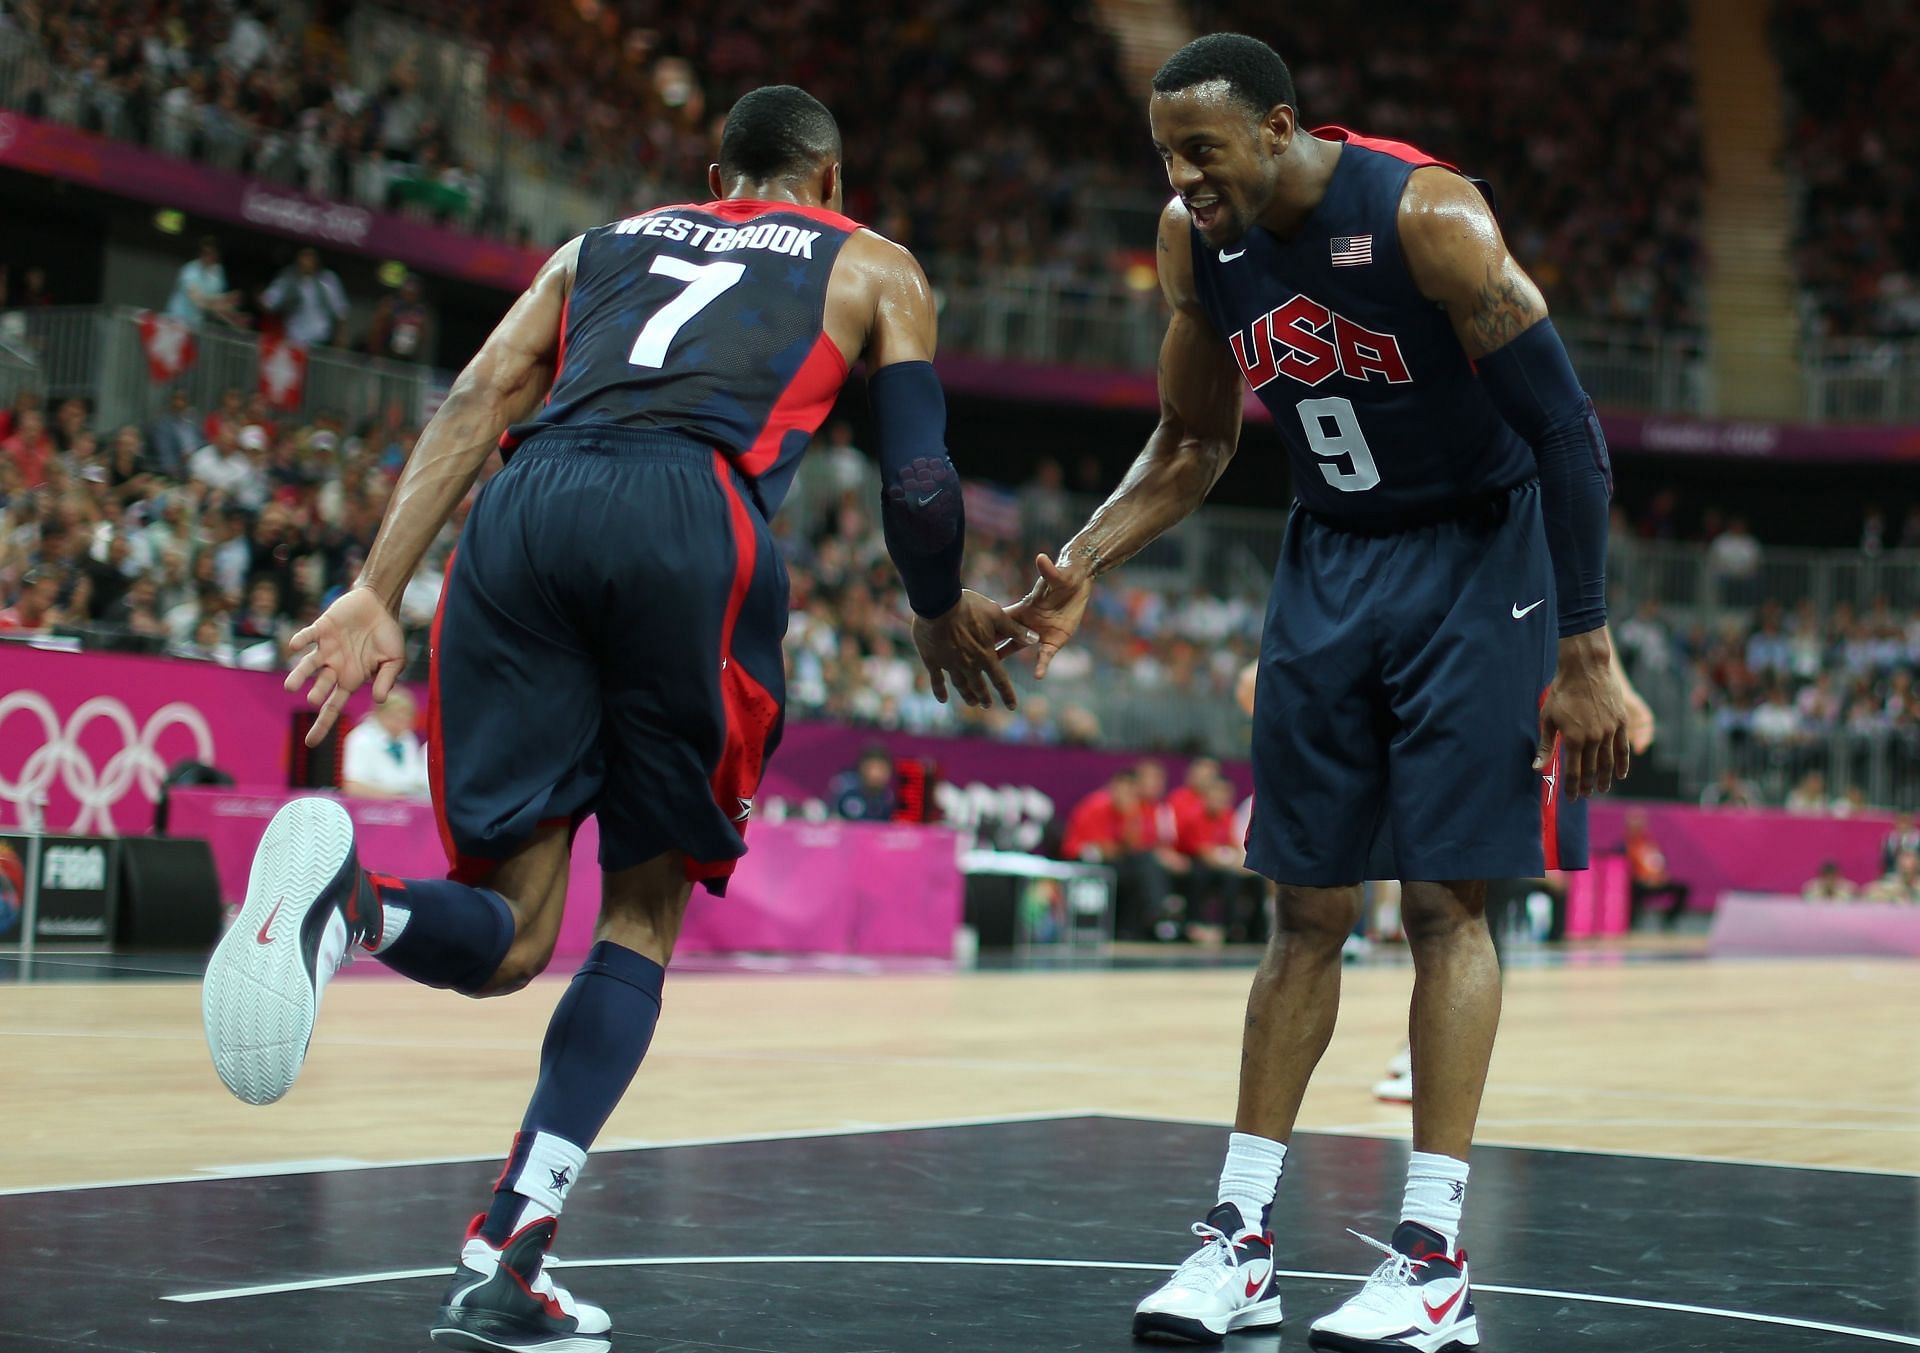 Russell Westbrook and Andre Iguodala at the Olympics Day 4 - Basketball